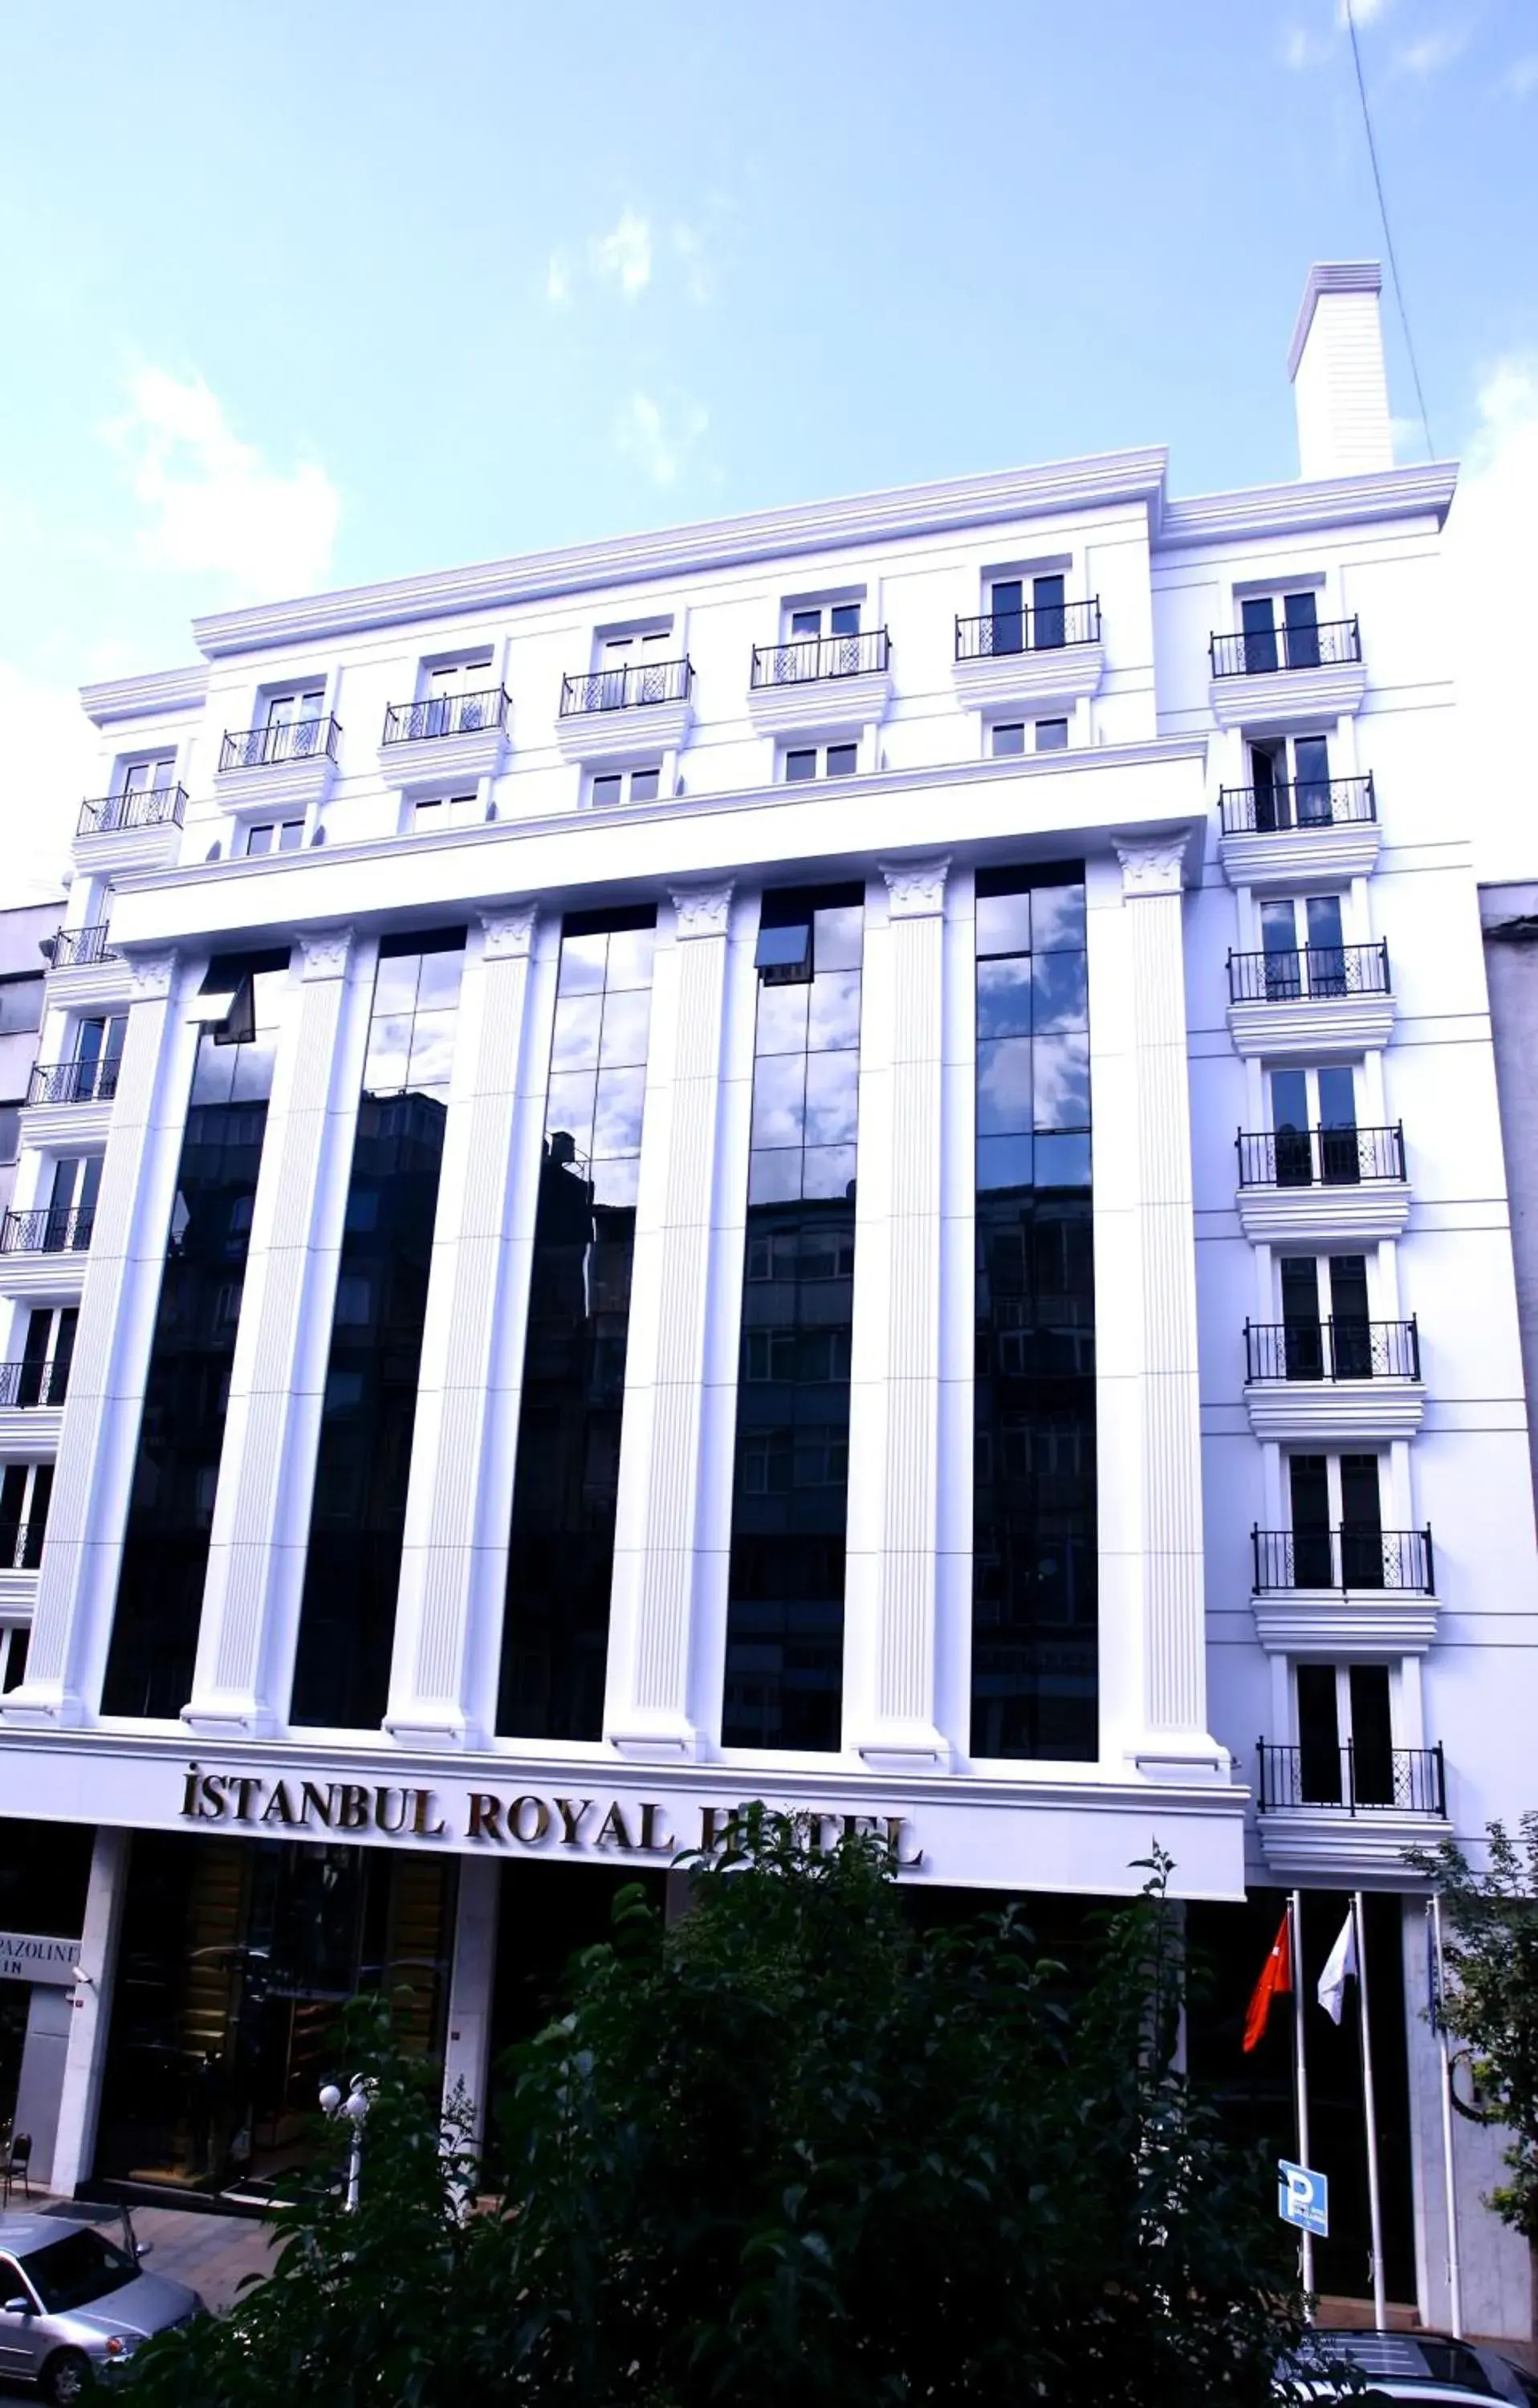 Property Building in Istanbul Royal Hotel